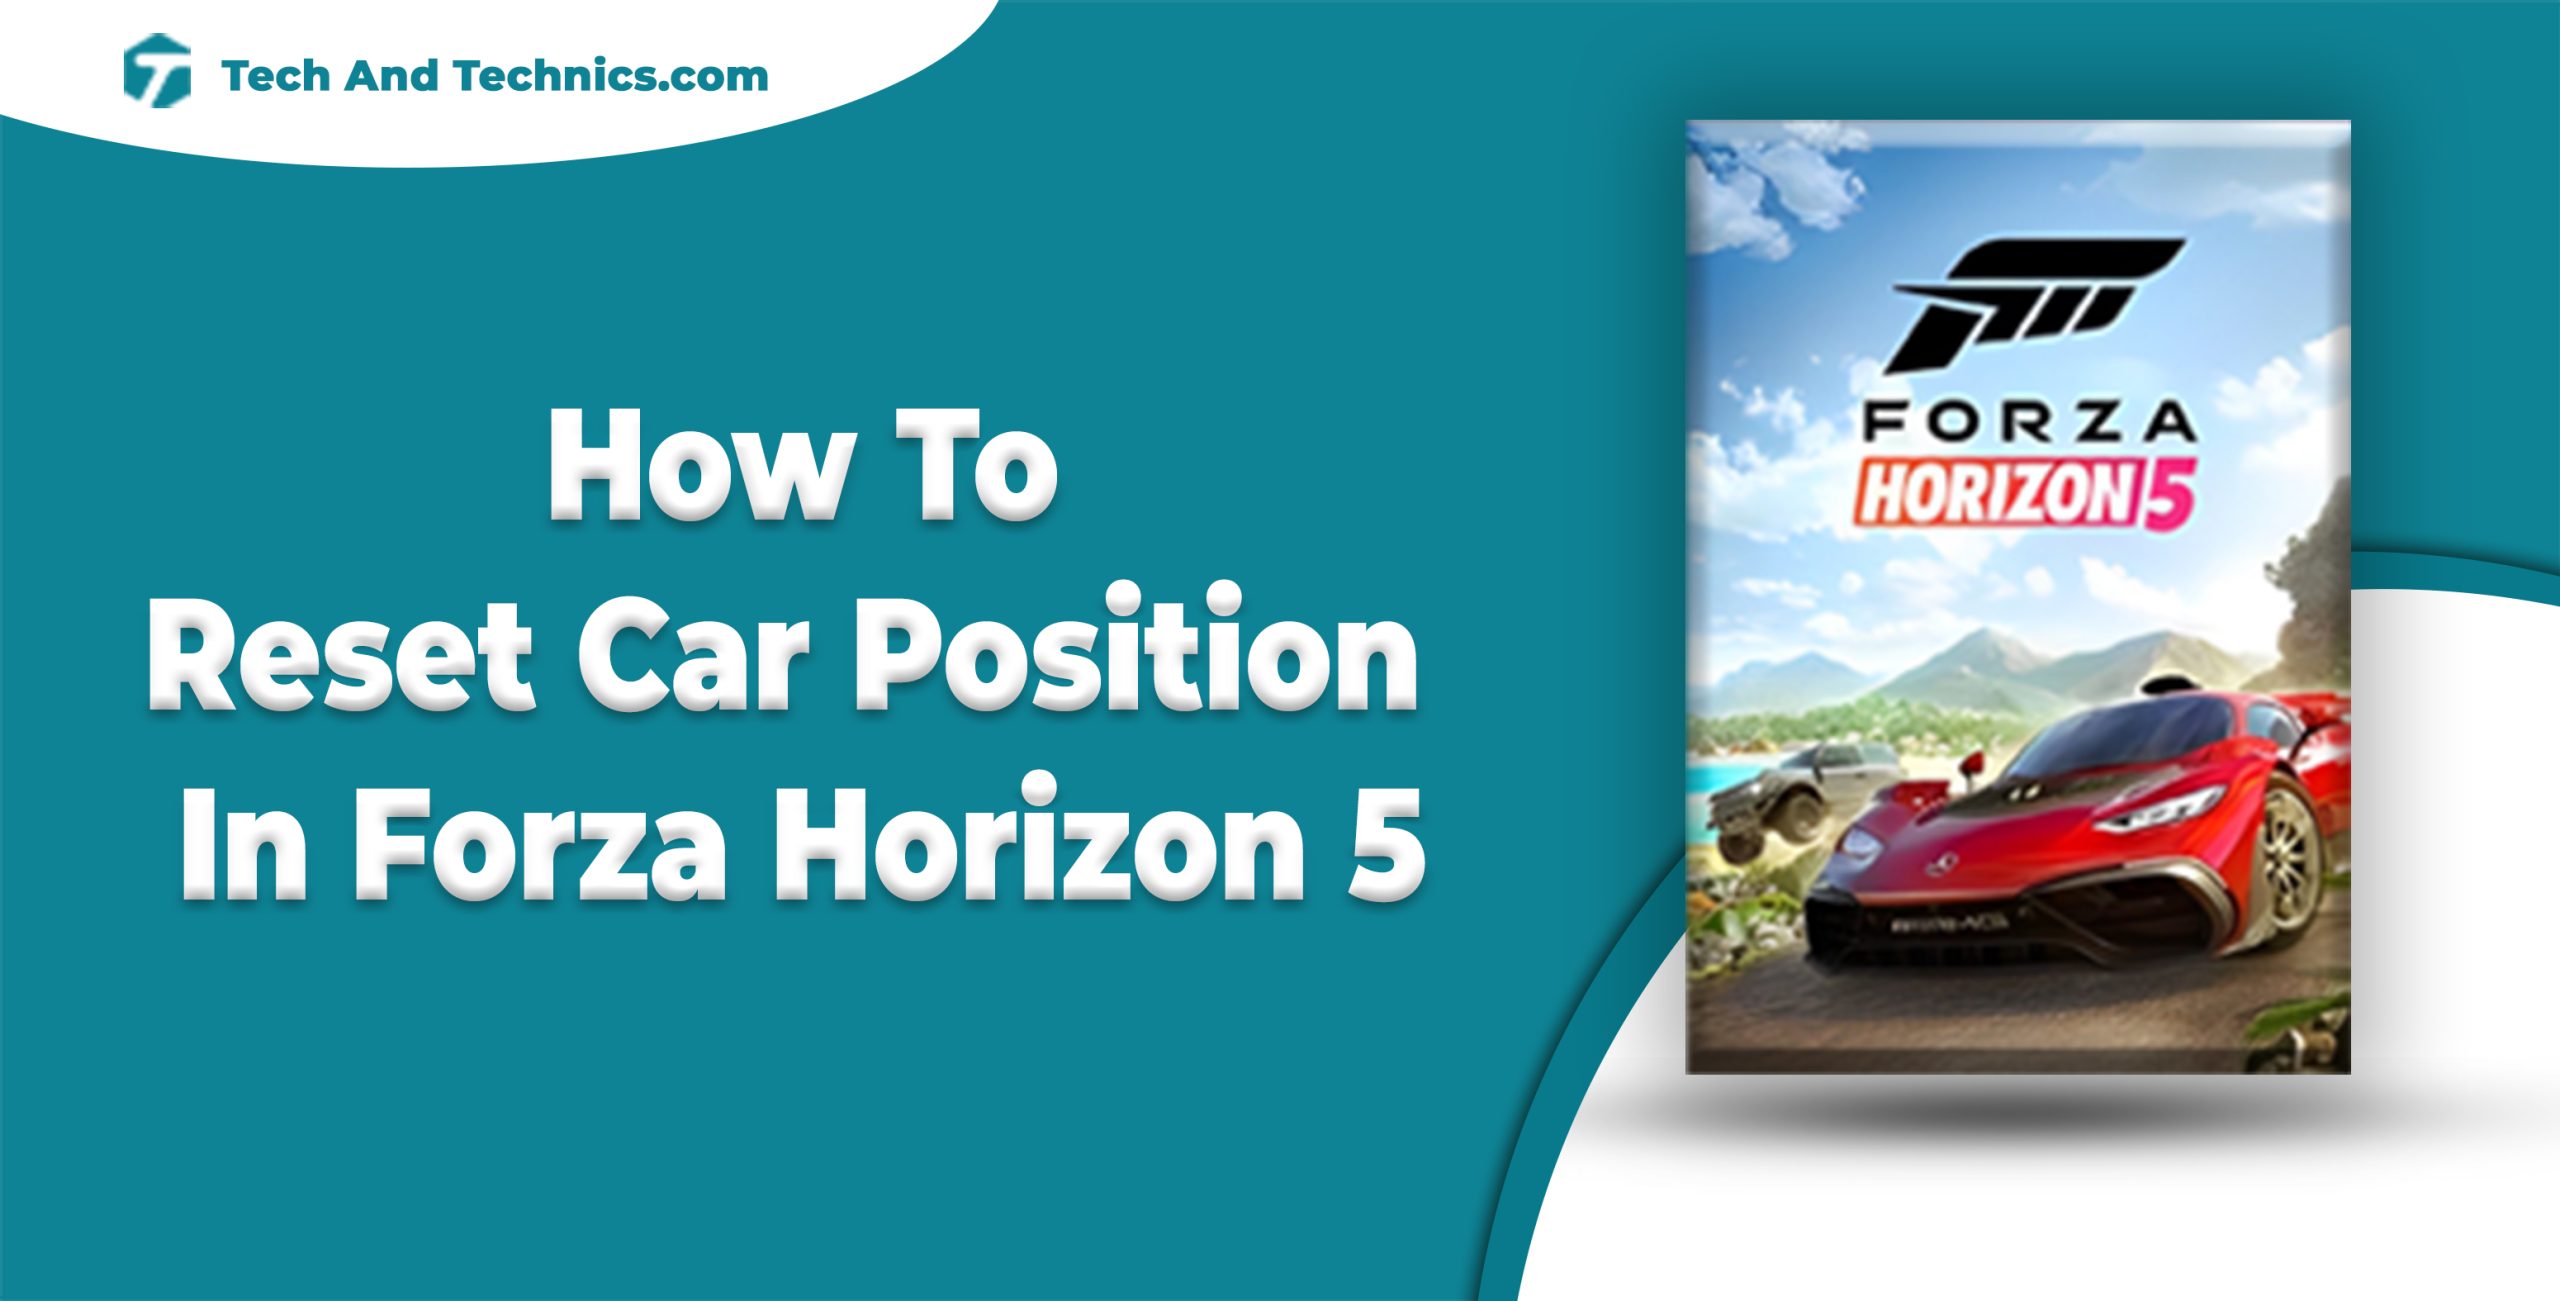 How To Reset Car Position In Forza Horizon 5 (Complete Guide)